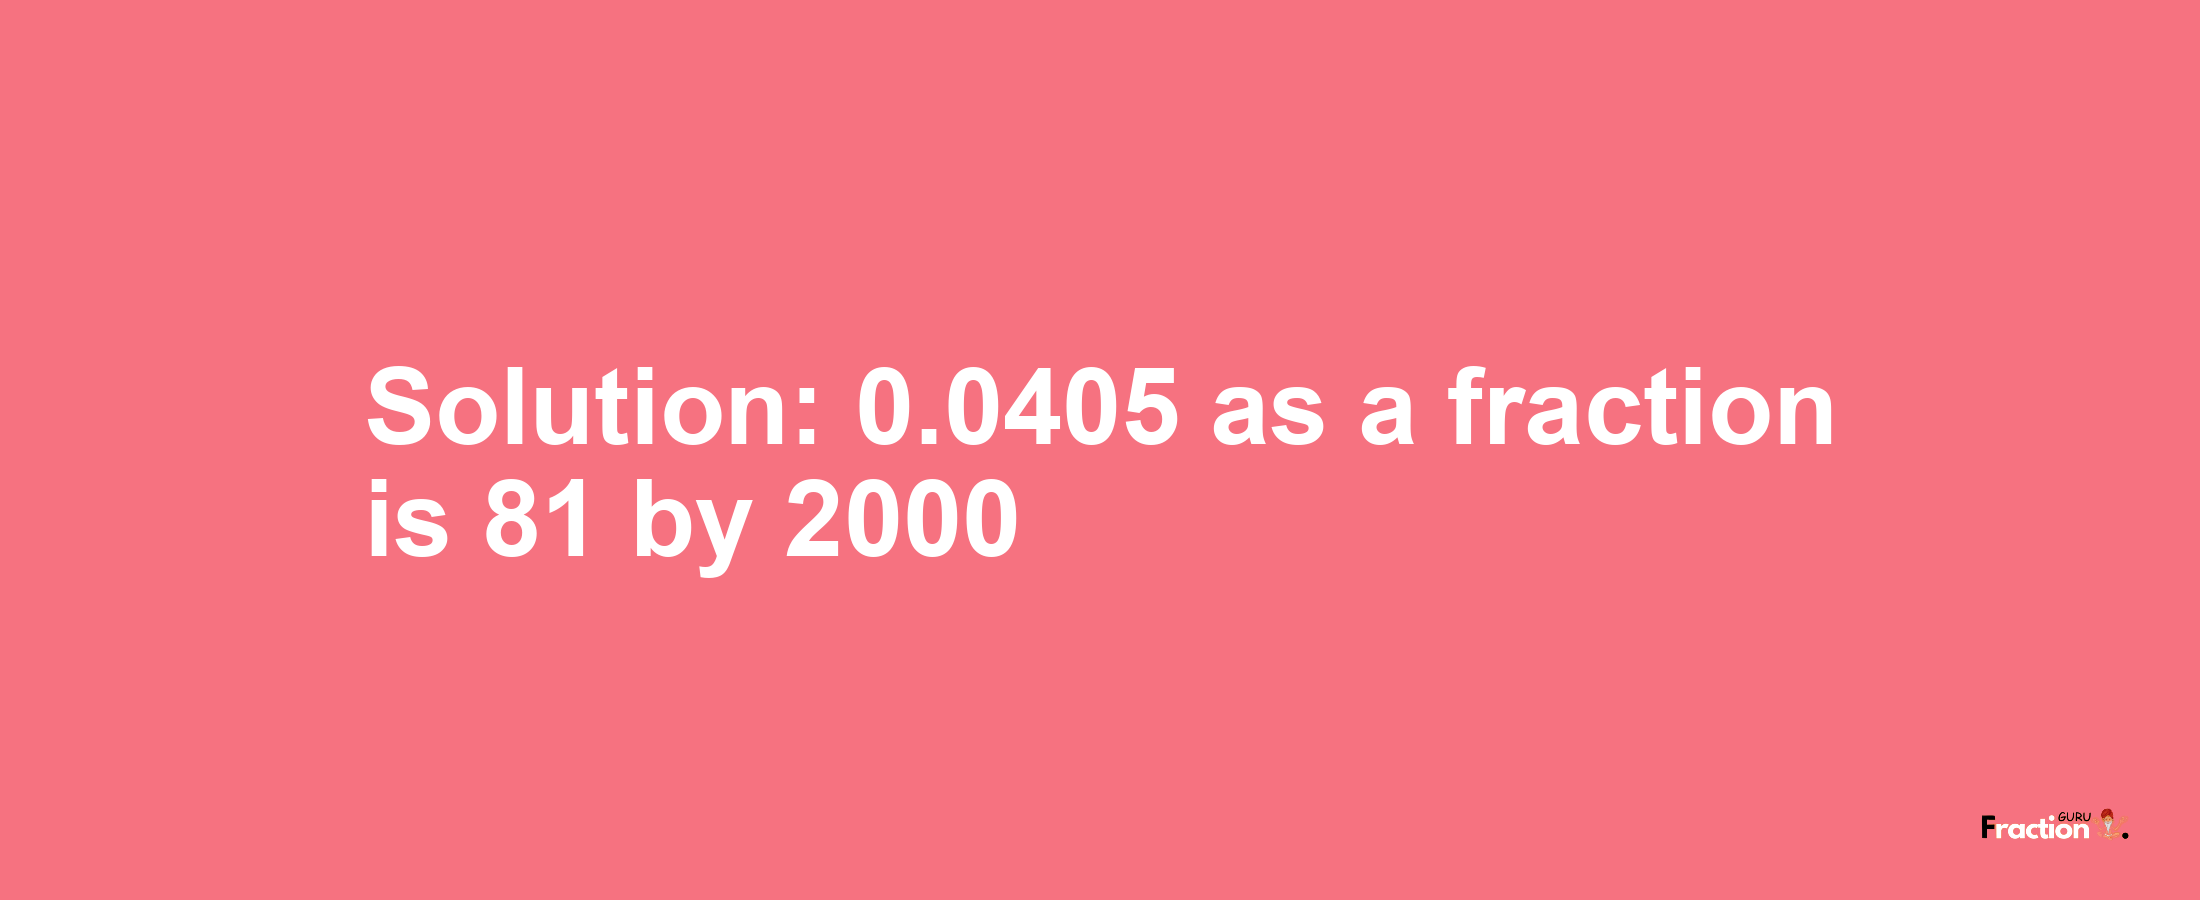 Solution:0.0405 as a fraction is 81/2000